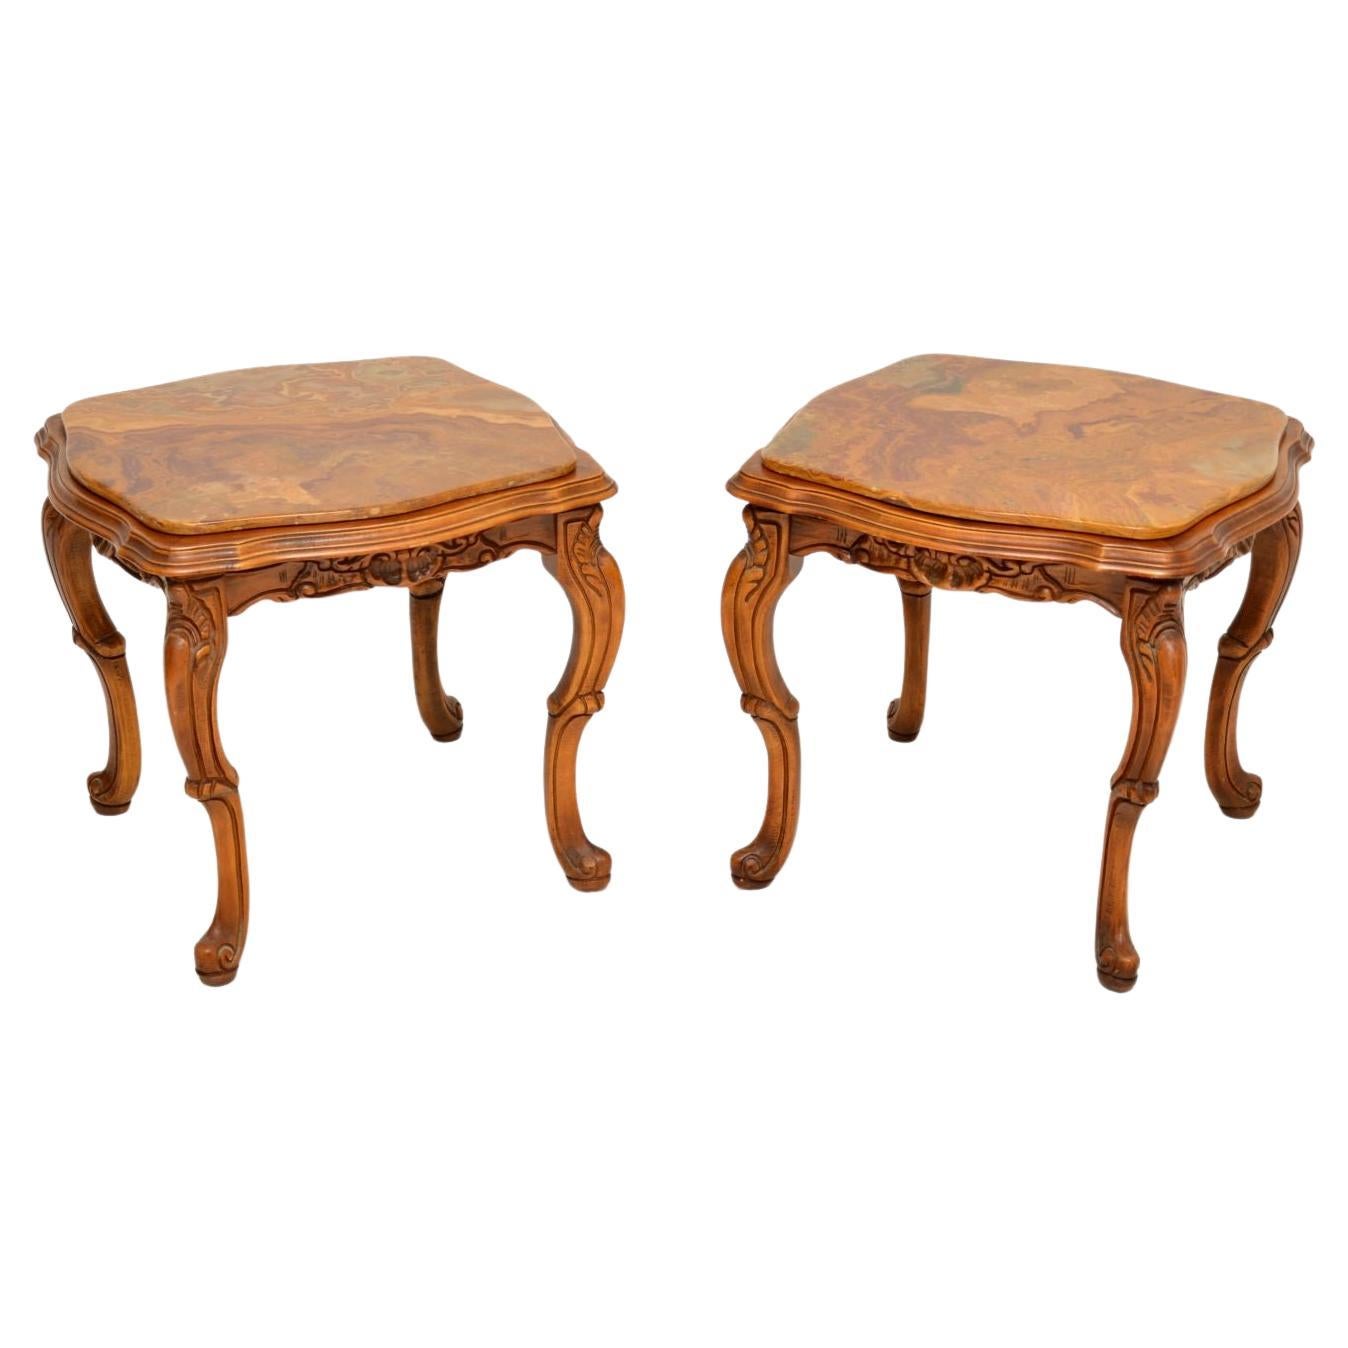 Pair of Antique Italian Walnut & Onyx Side Tables For Sale